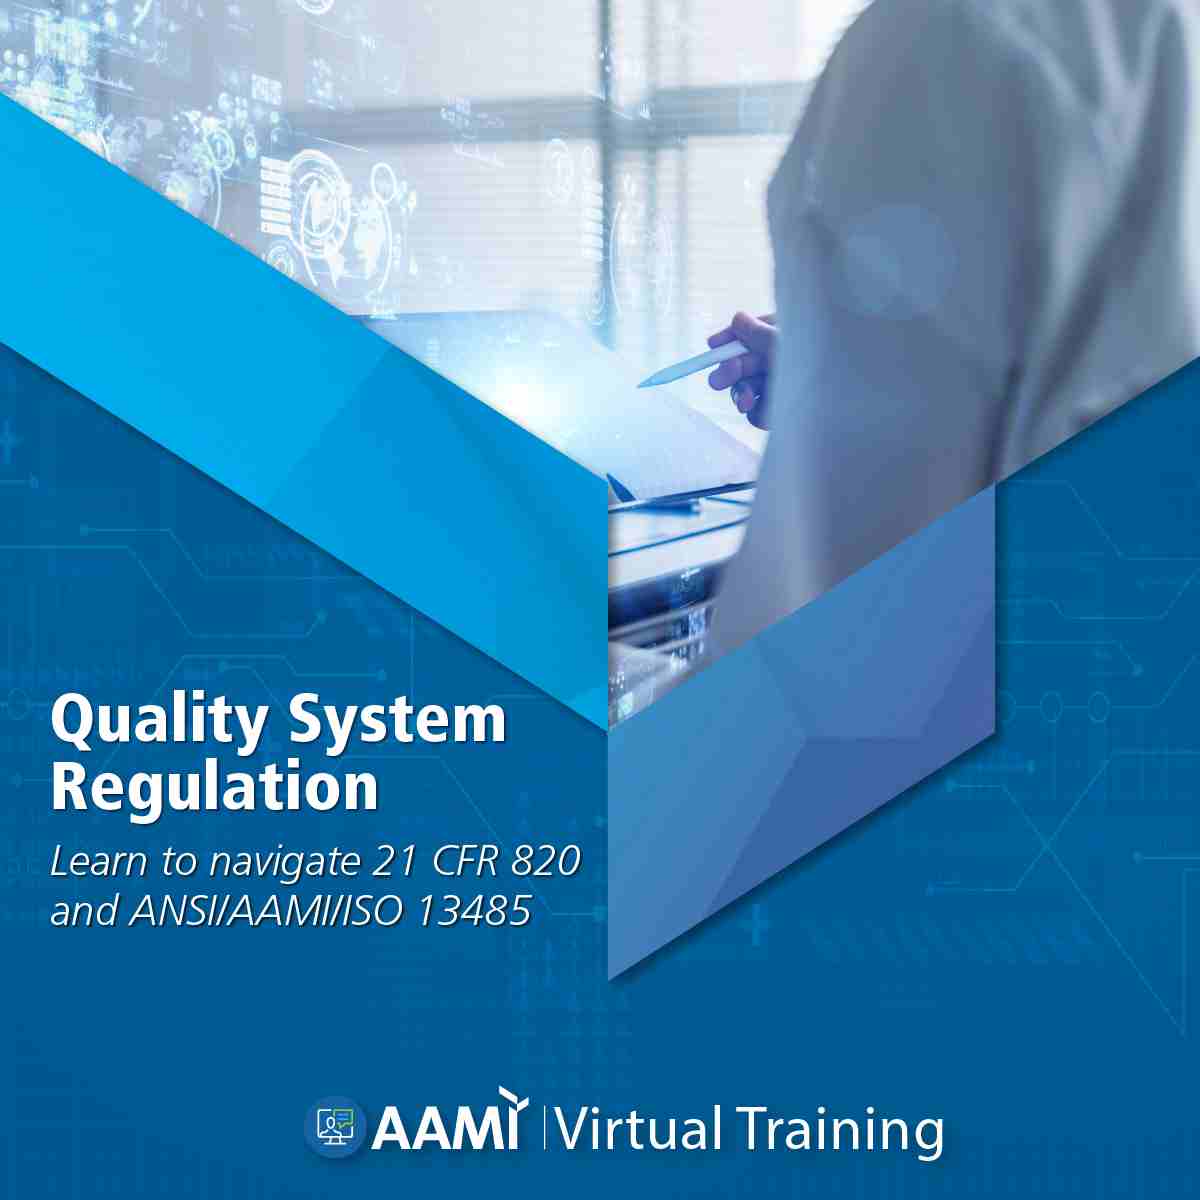 EUROPE: Quality System Regulation 21 CFR 820 & ANSI/AAMI/ISO 13485